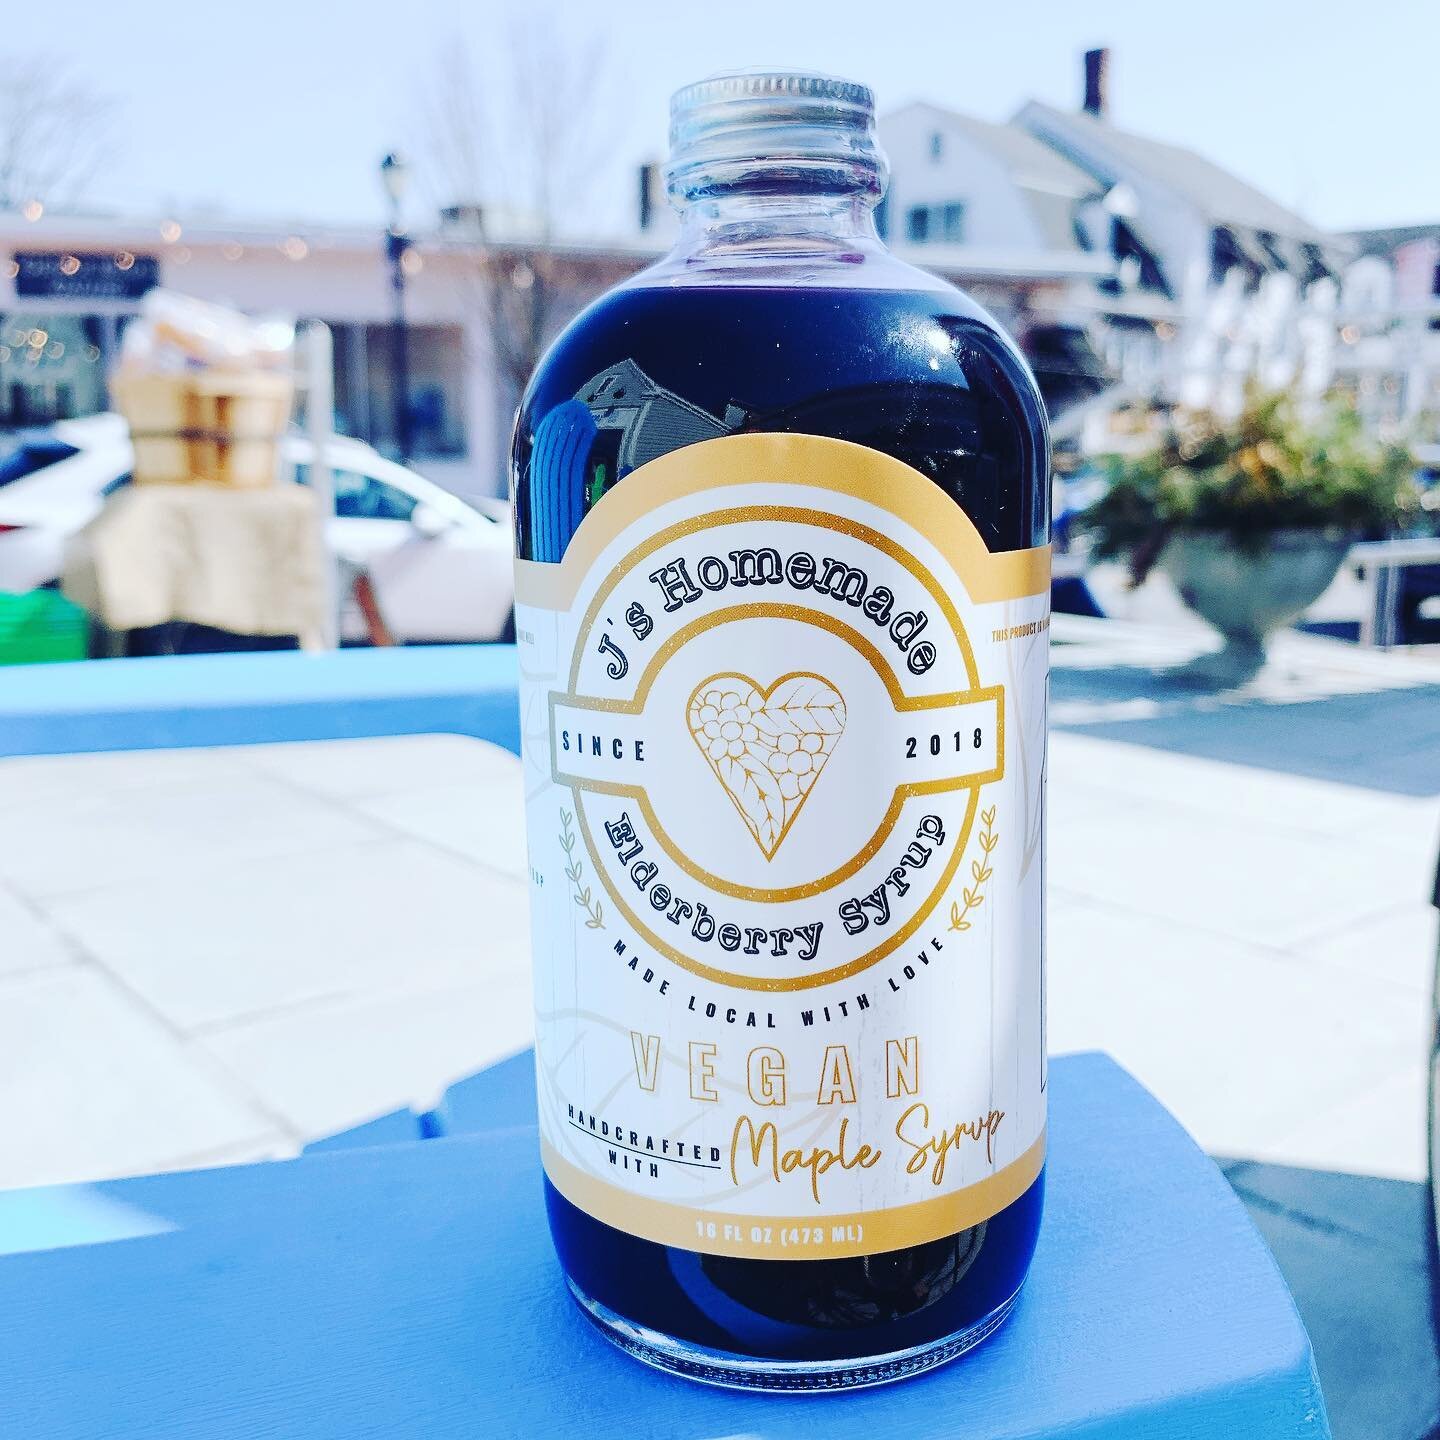 ☀️Just arrived in store and in time for the weekend: 
Vegan @jshomemadesyrup 
plus delectable @whistlestopct pies and some seriously good house made dips from Oliva on Main in Bethlehem!☀️